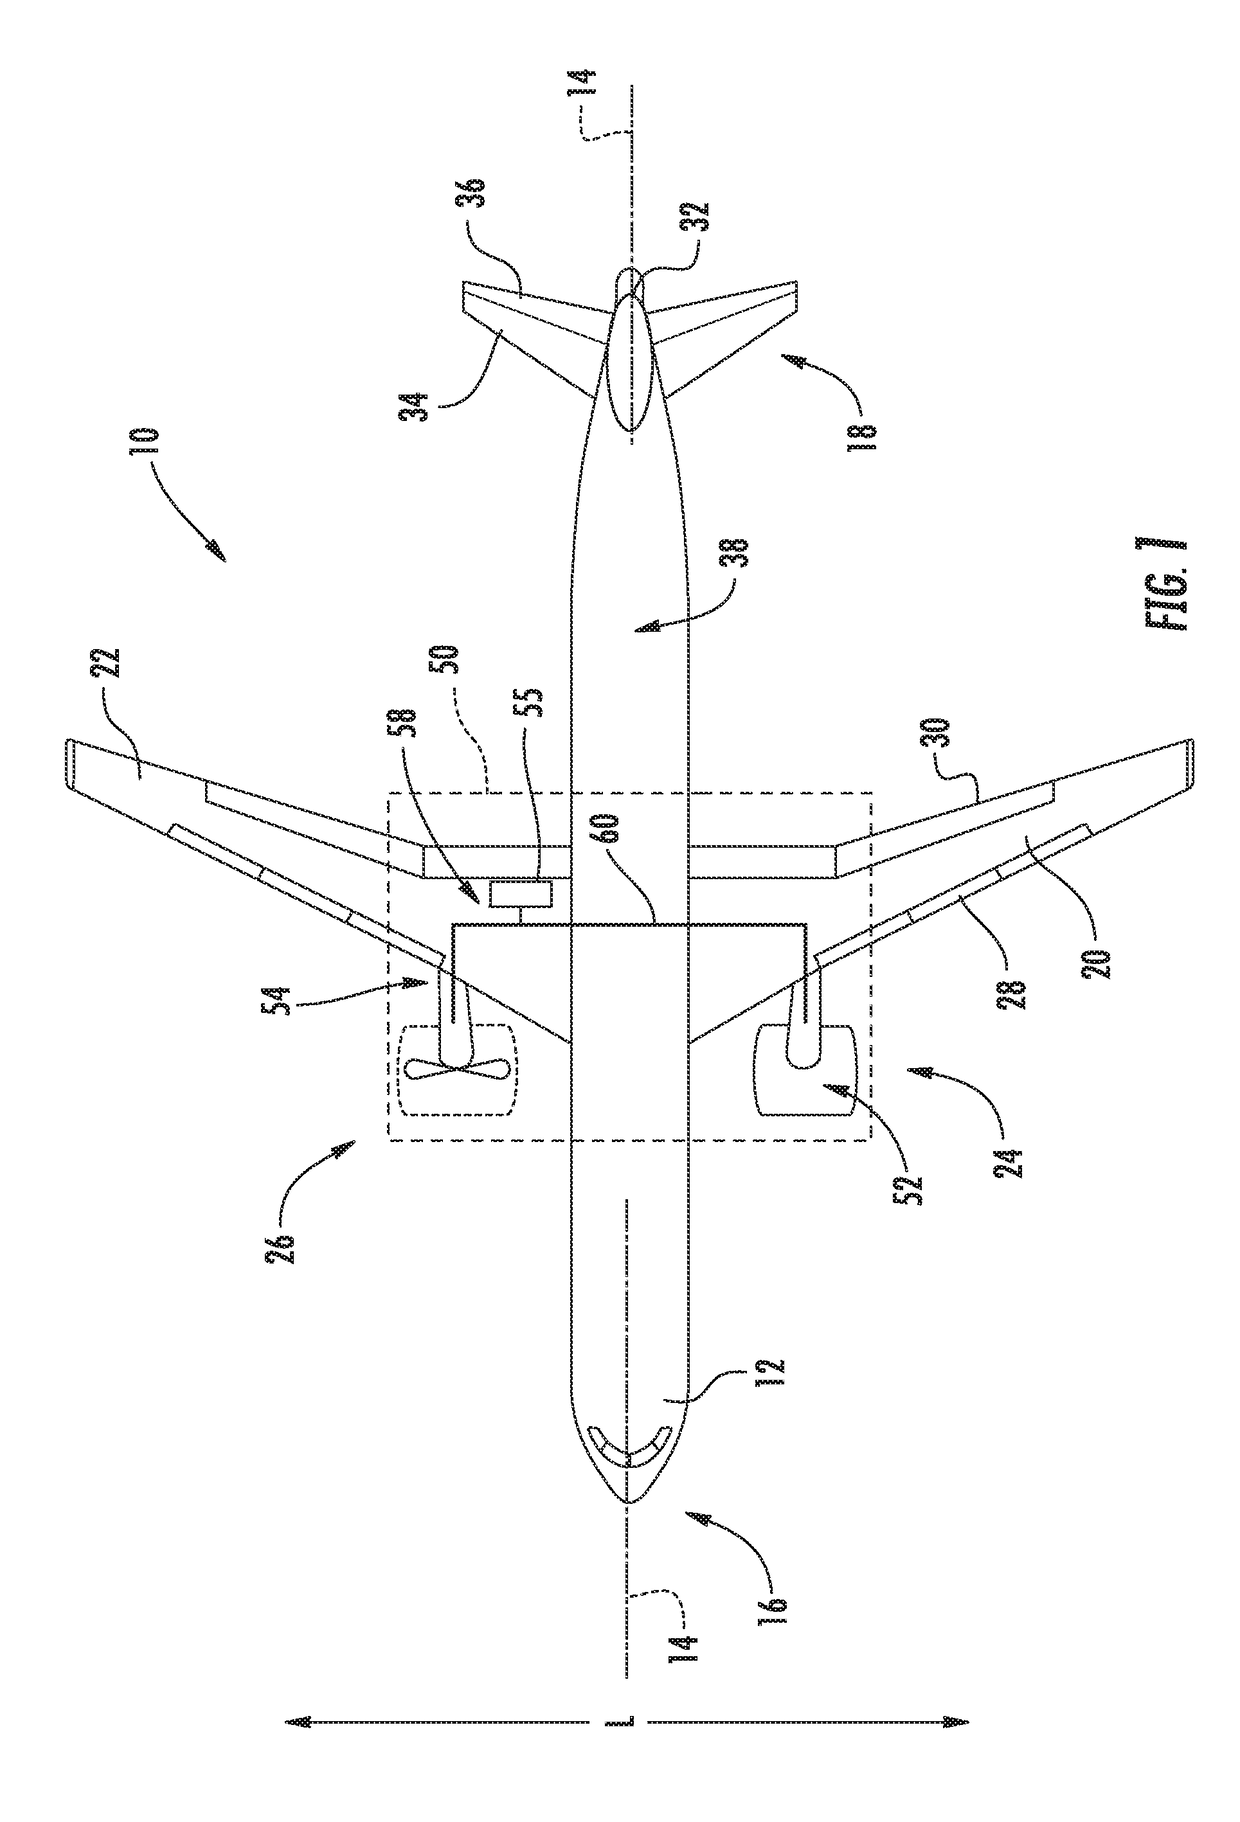 Propulsion System for an Aircraft